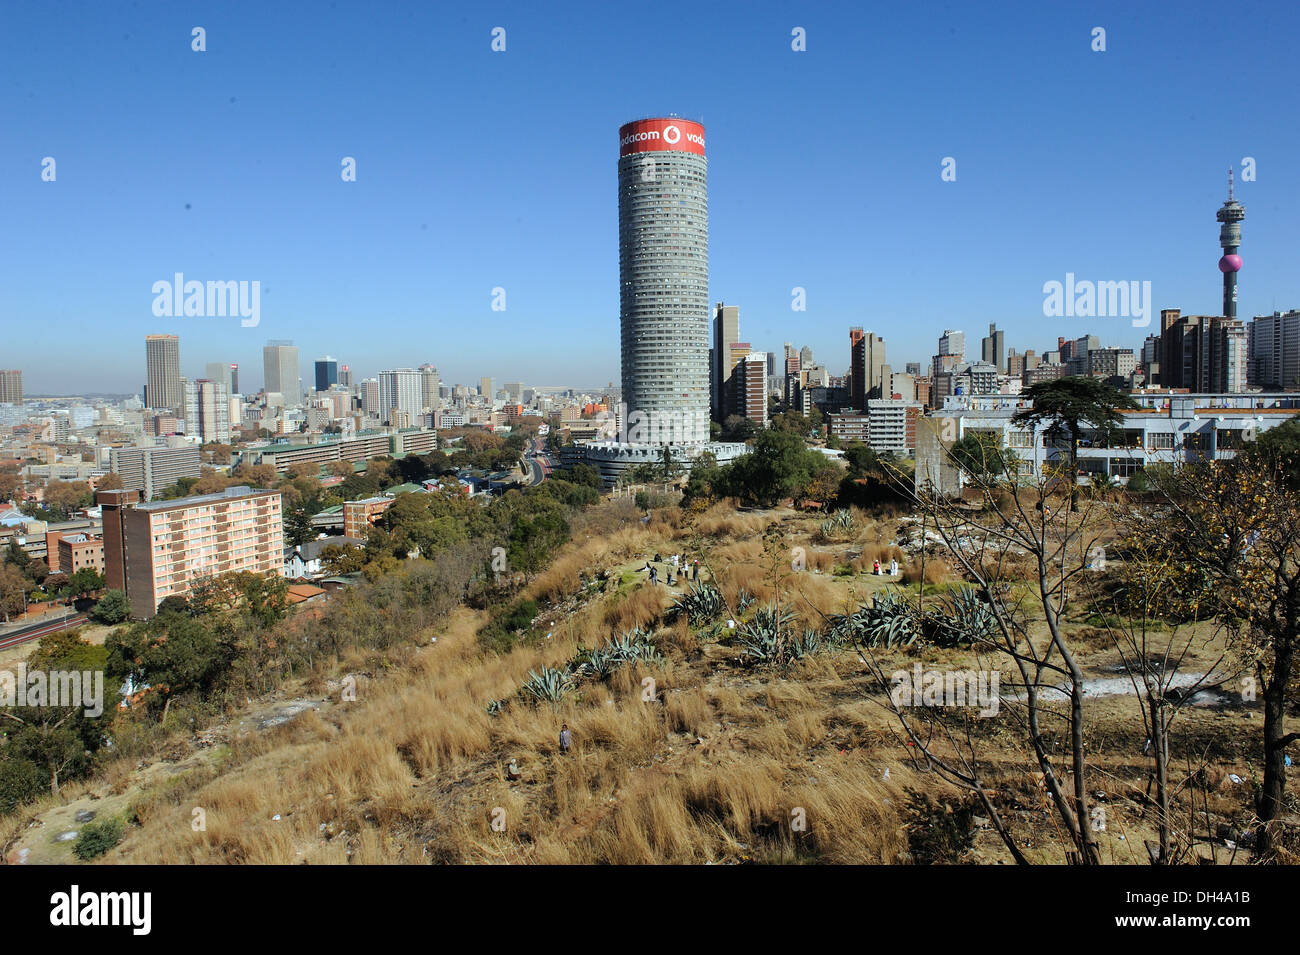 Network tall round cylindrical upright building at Johannesburg south africa Stock Photo